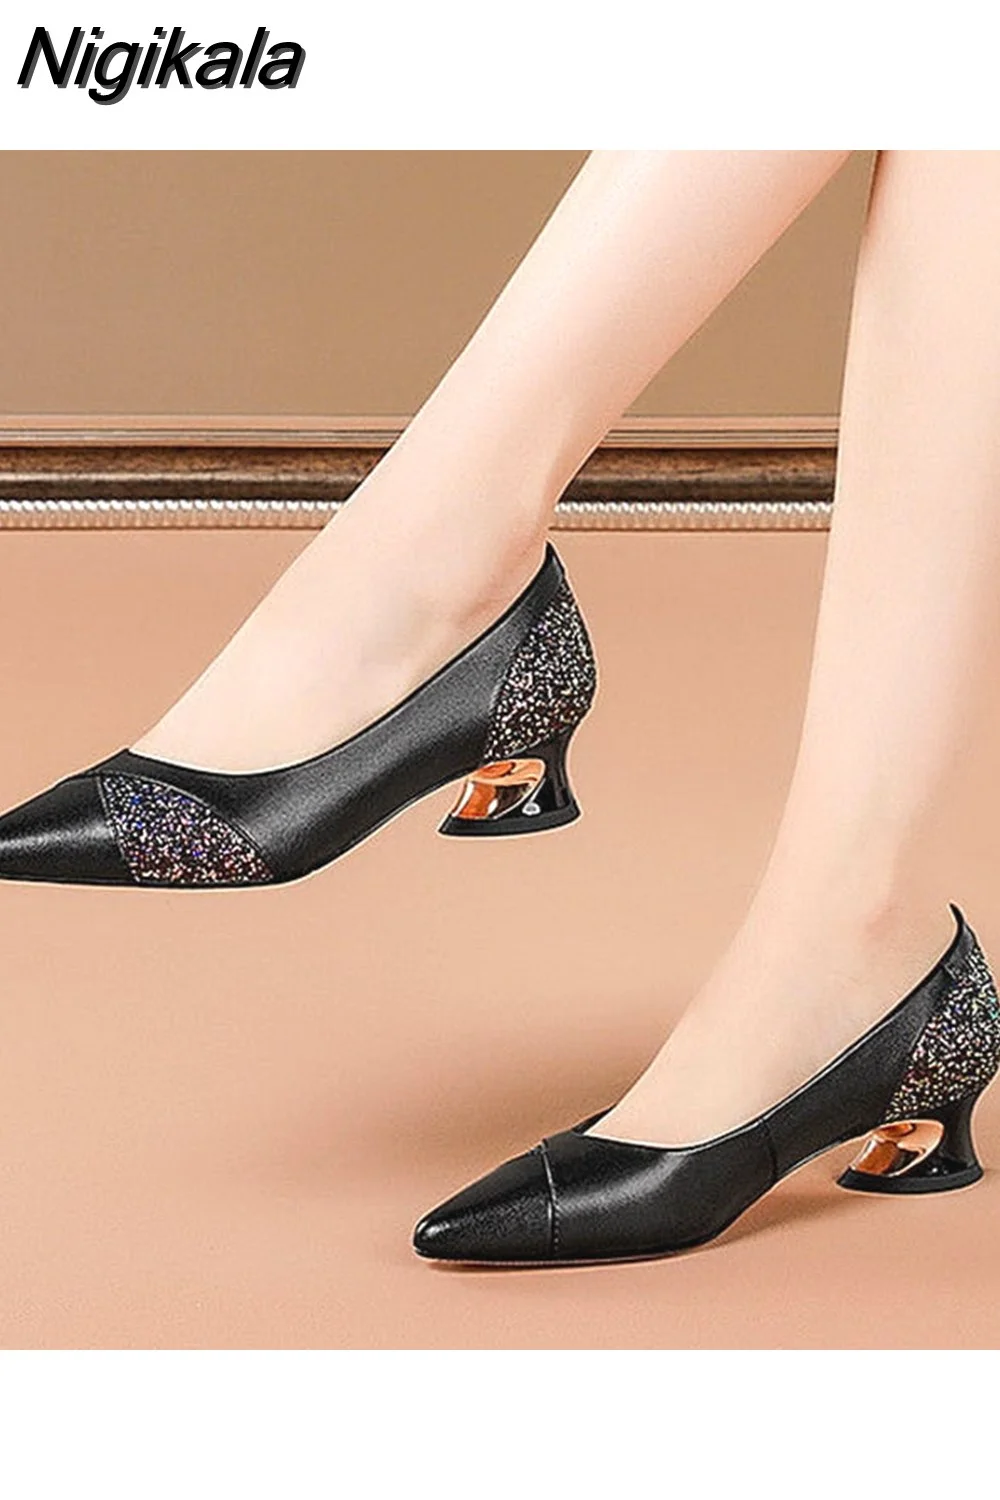 Nigikala Heel Single Shoes Women,Pointed toe,Office Lady Working Shoes,Shallow,French Style,Female Footware,Black,Gun Color 420-1